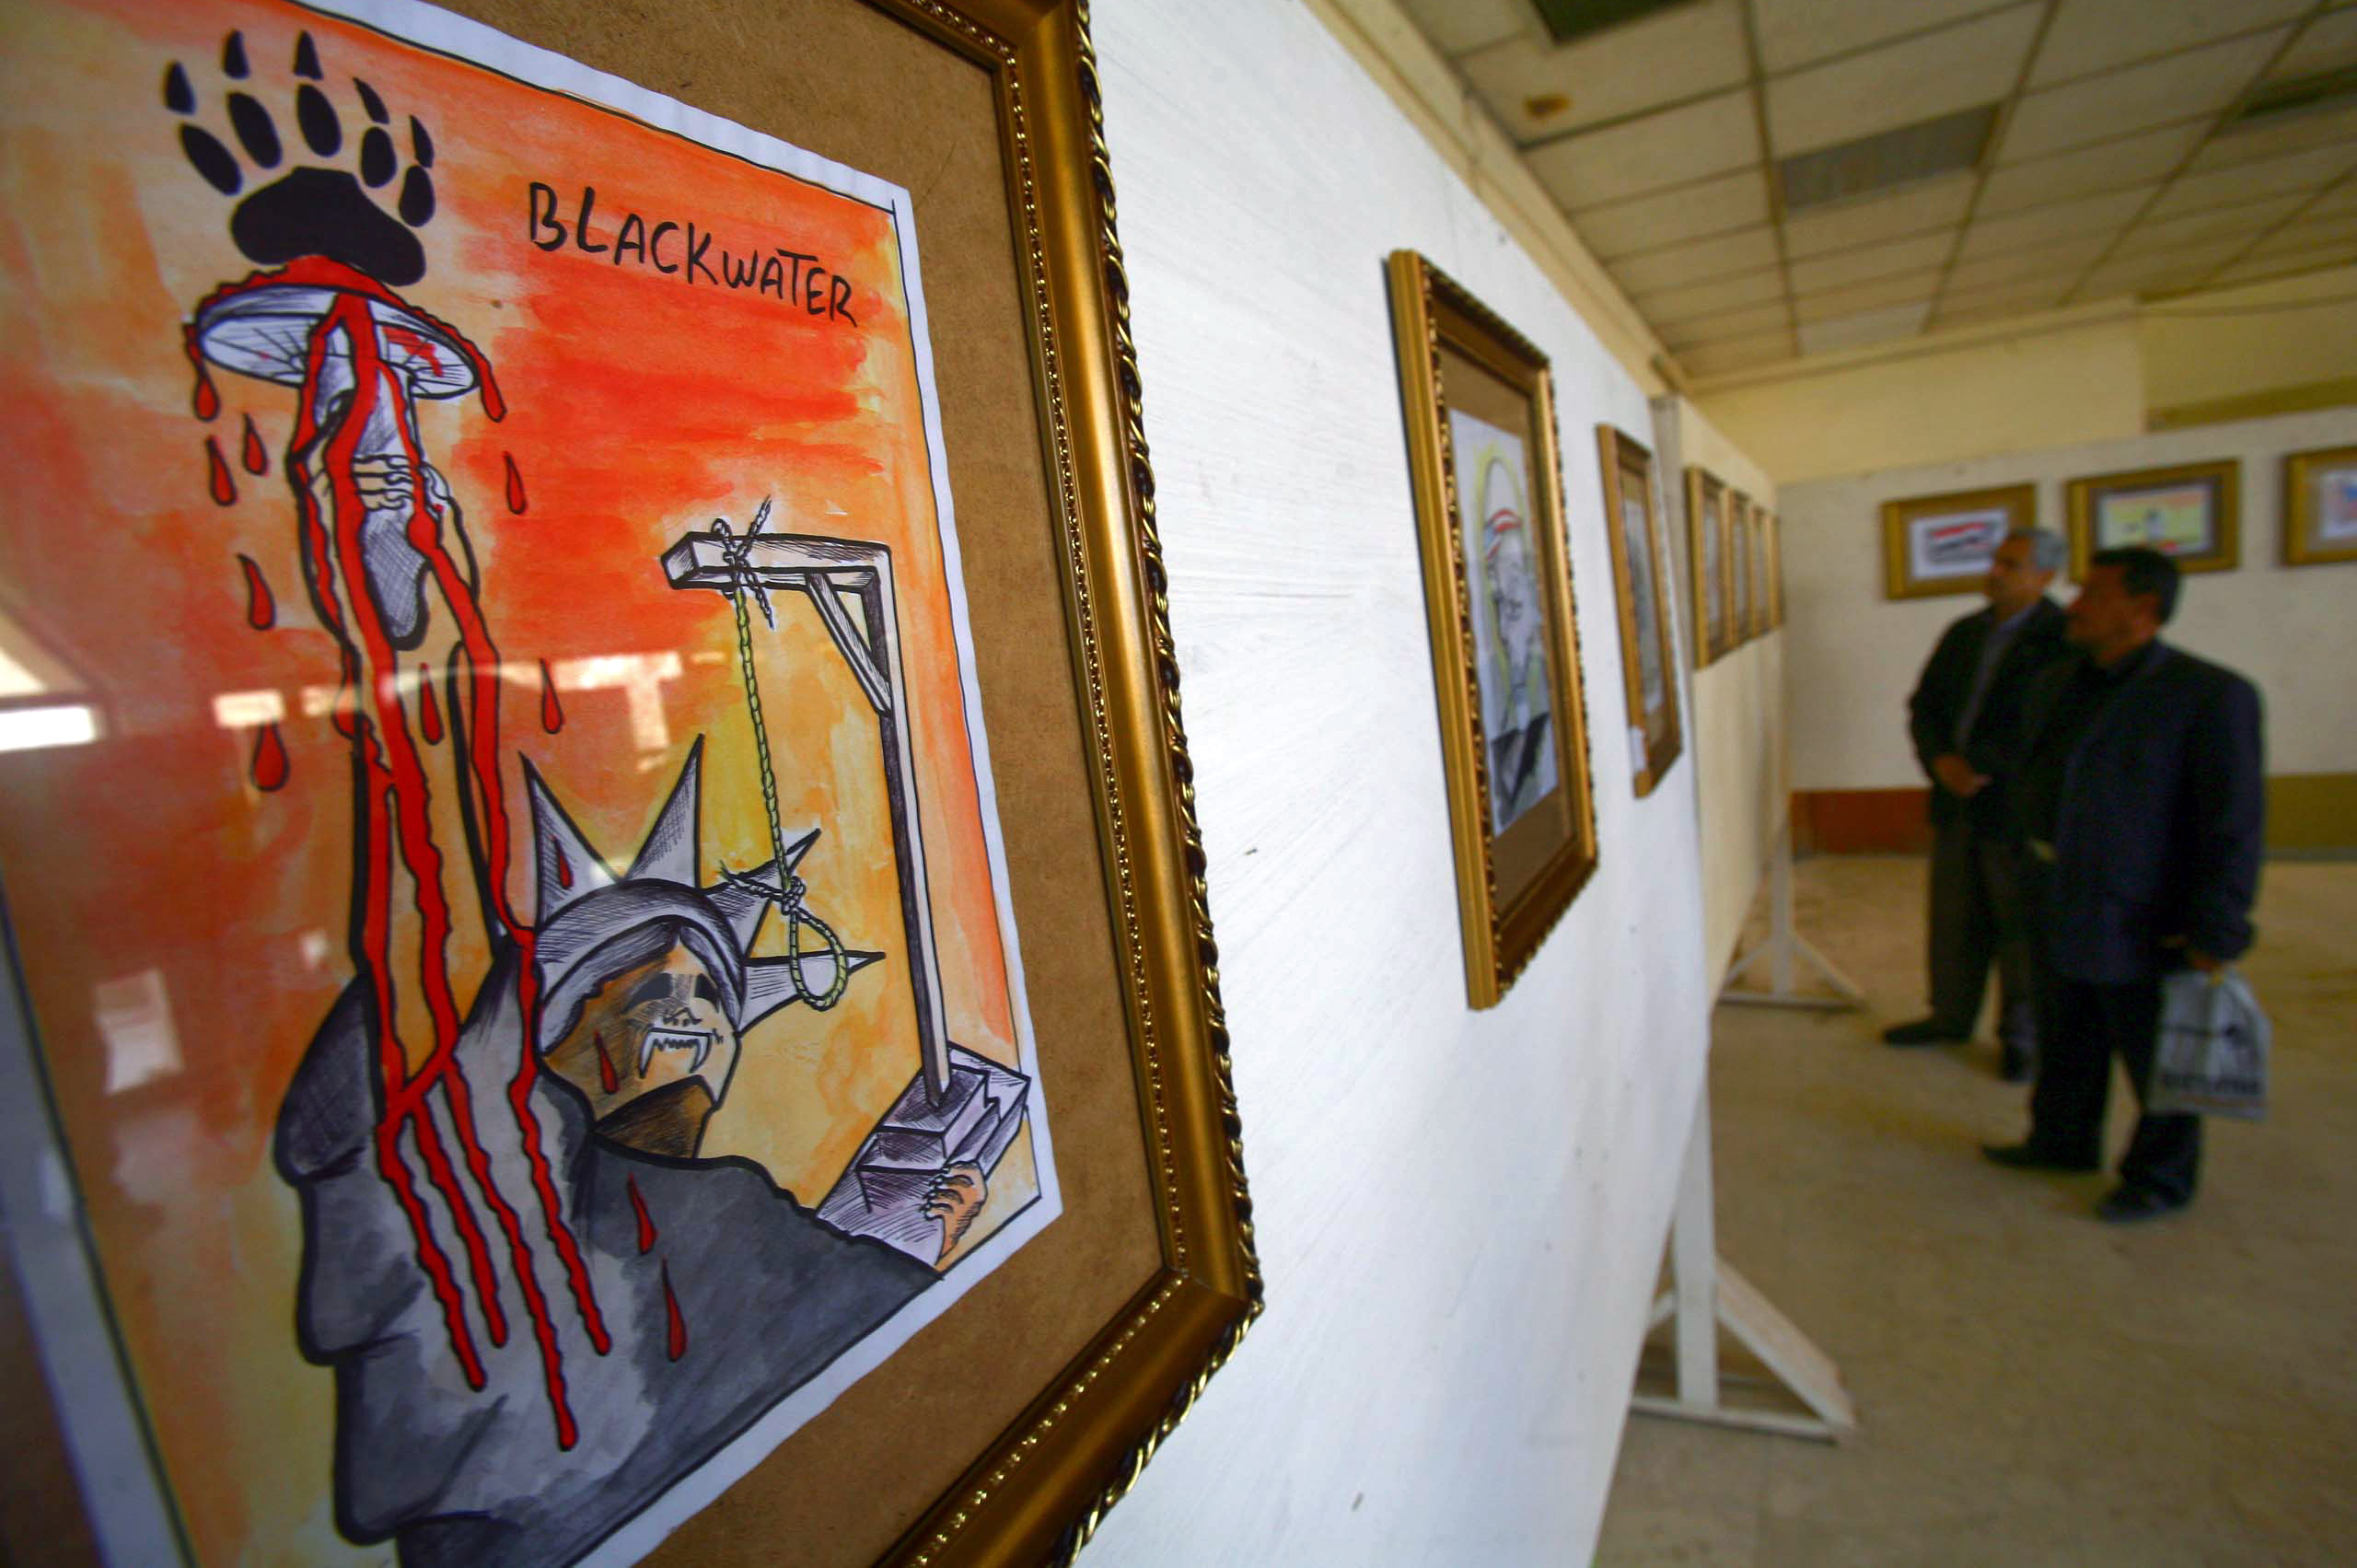 A cartoon against US security firm Blackwater, which was barred from Iraq over the deadly 2007 shooting, is displayed at an exhibition in Karbala, central Iraq in 2011 (AFP)